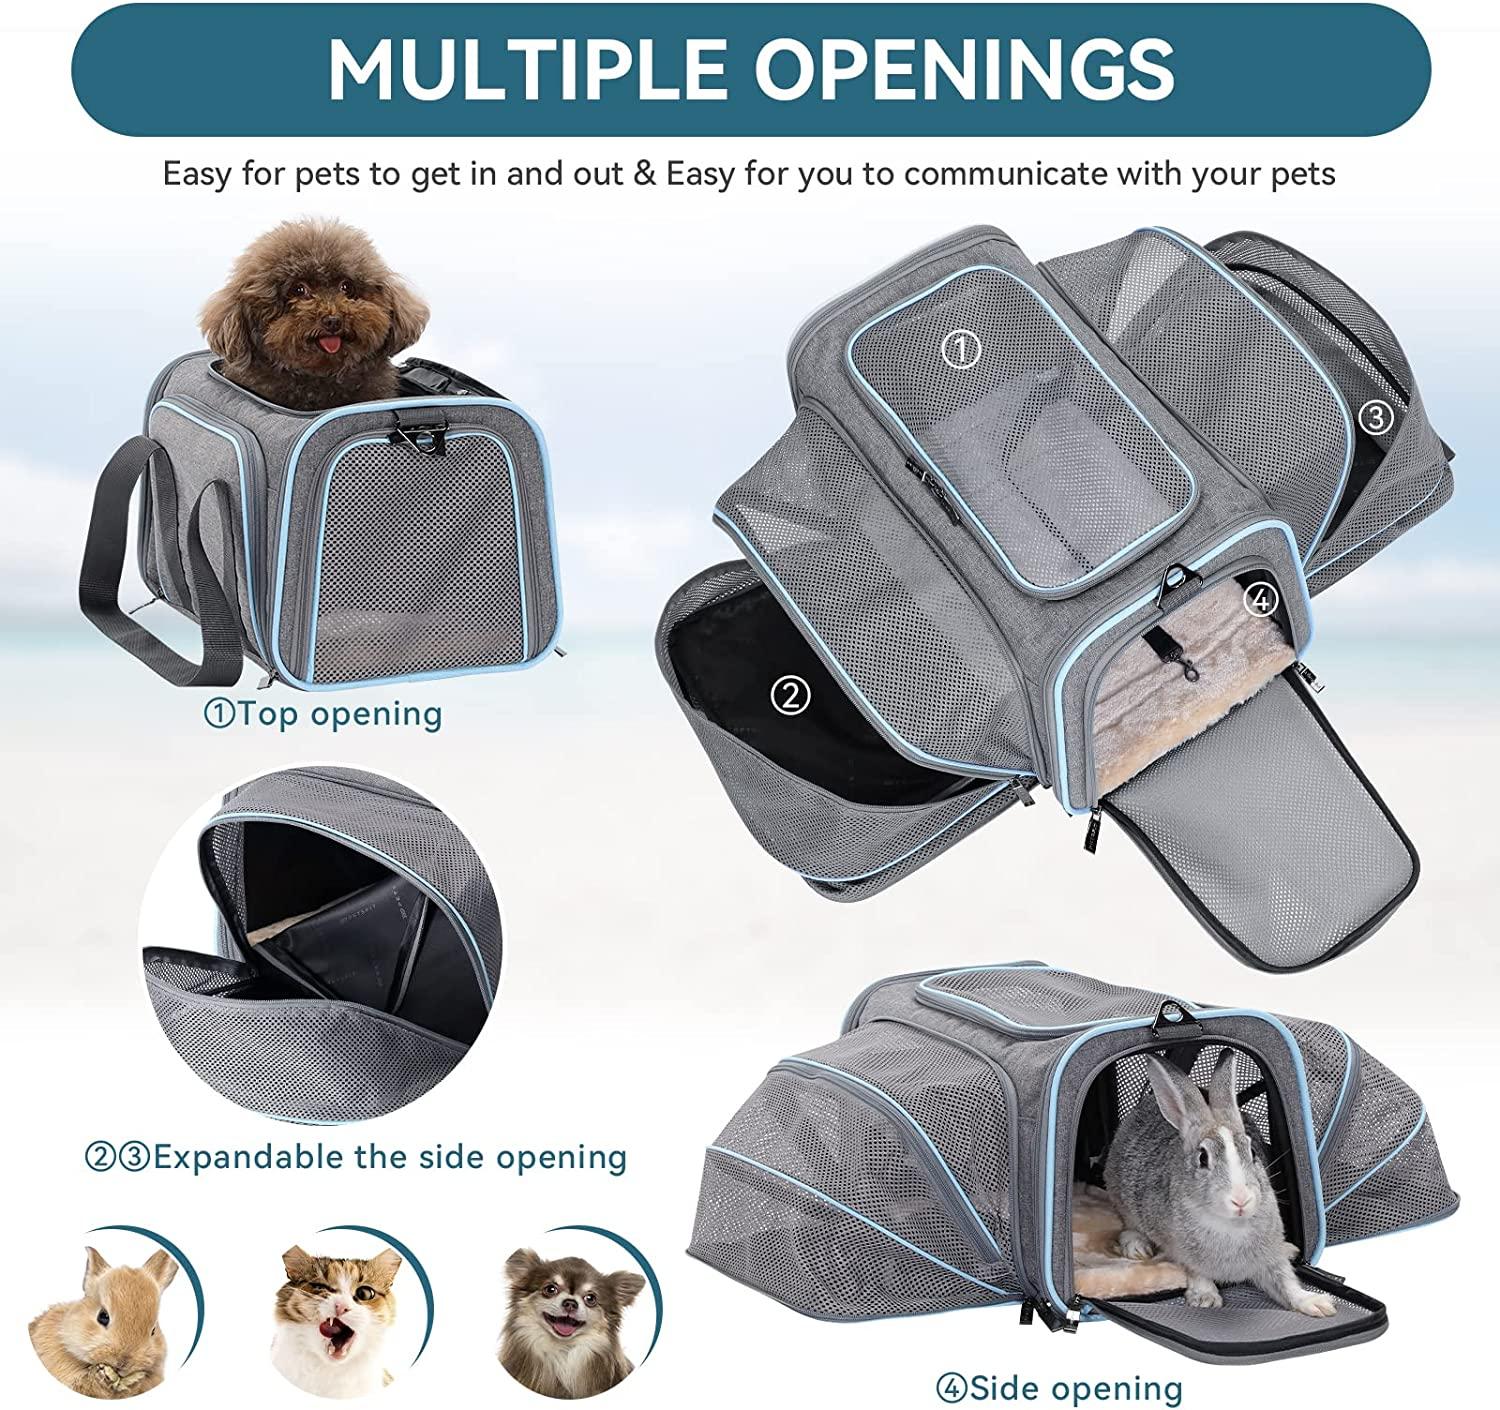 Cat Dog Carrier, Airline Approved Expandable Soft-sided Pet